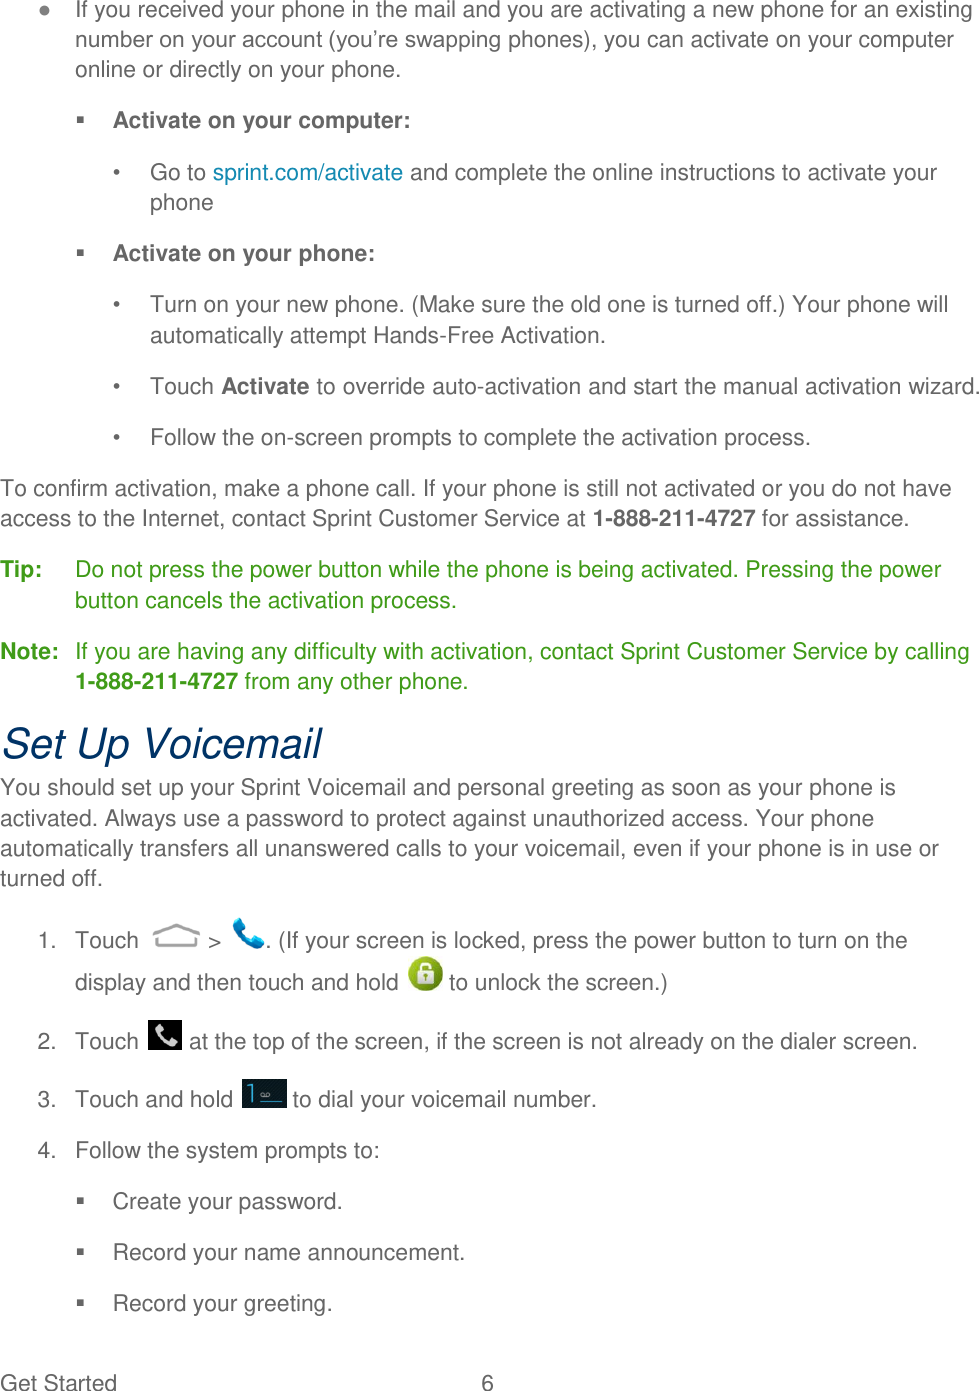 Get Started  6   ● If you received your phone in the mail and you are activating a new phone for an existing number on your account (you‟re swapping phones), you can activate on your computer online or directly on your phone.  Activate on your computer: •  Go to sprint.com/activate and complete the online instructions to activate your phone  Activate on your phone: •  Turn on your new phone. (Make sure the old one is turned off.) Your phone will automatically attempt Hands-Free Activation. •  Touch Activate to override auto-activation and start the manual activation wizard. •  Follow the on-screen prompts to complete the activation process. To confirm activation, make a phone call. If your phone is still not activated or you do not have access to the Internet, contact Sprint Customer Service at 1-888-211-4727 for assistance. Tip:   Do not press the power button while the phone is being activated. Pressing the power button cancels the activation process. Note:   If you are having any difficulty with activation, contact Sprint Customer Service by calling 1-888-211-4727 from any other phone. Set Up Voicemail You should set up your Sprint Voicemail and personal greeting as soon as your phone is activated. Always use a password to protect against unauthorized access. Your phone automatically transfers all unanswered calls to your voicemail, even if your phone is in use or turned off. 1.  Touch   &gt;  . (If your screen is locked, press the power button to turn on the display and then touch and hold   to unlock the screen.) 2.  Touch   at the top of the screen, if the screen is not already on the dialer screen. 3.  Touch and hold   to dial your voicemail number. 4.  Follow the system prompts to:   Create your password.   Record your name announcement.   Record your greeting. 